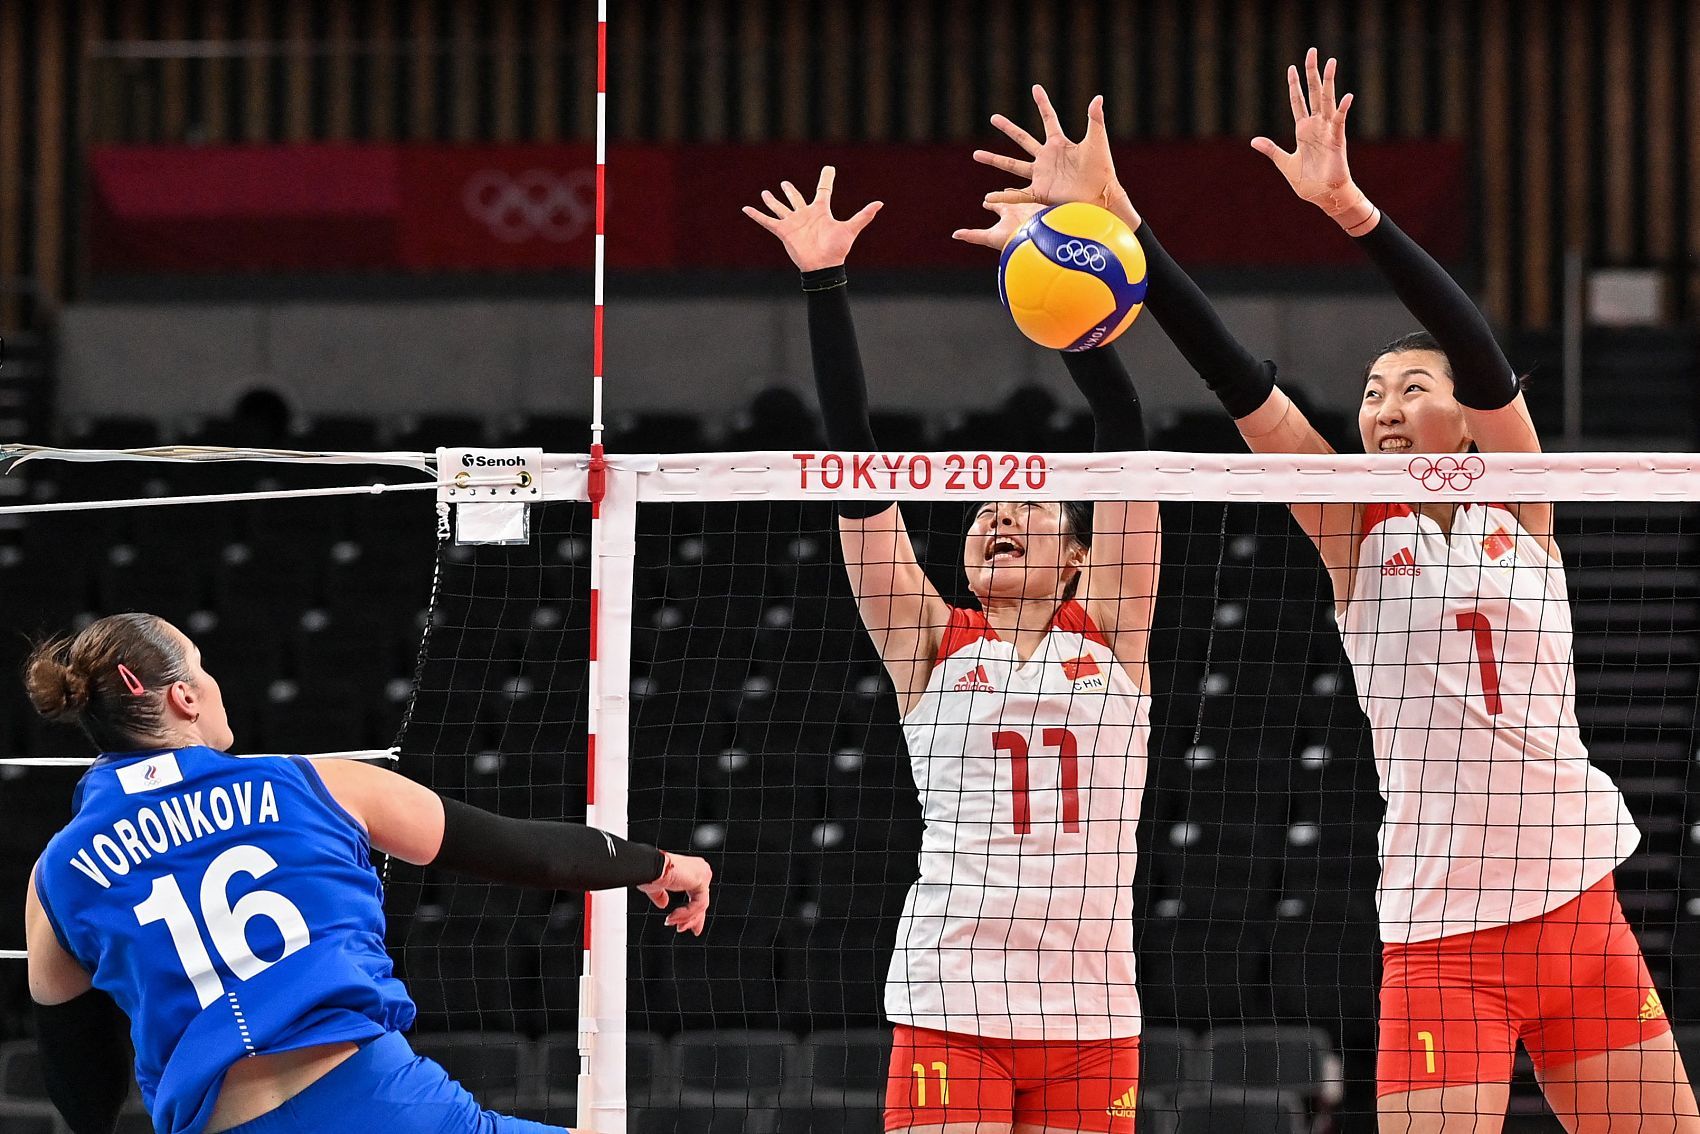 [feature] Chinese women's volleyball team suffered a three-game losing streak to the Russian Olympic Committee